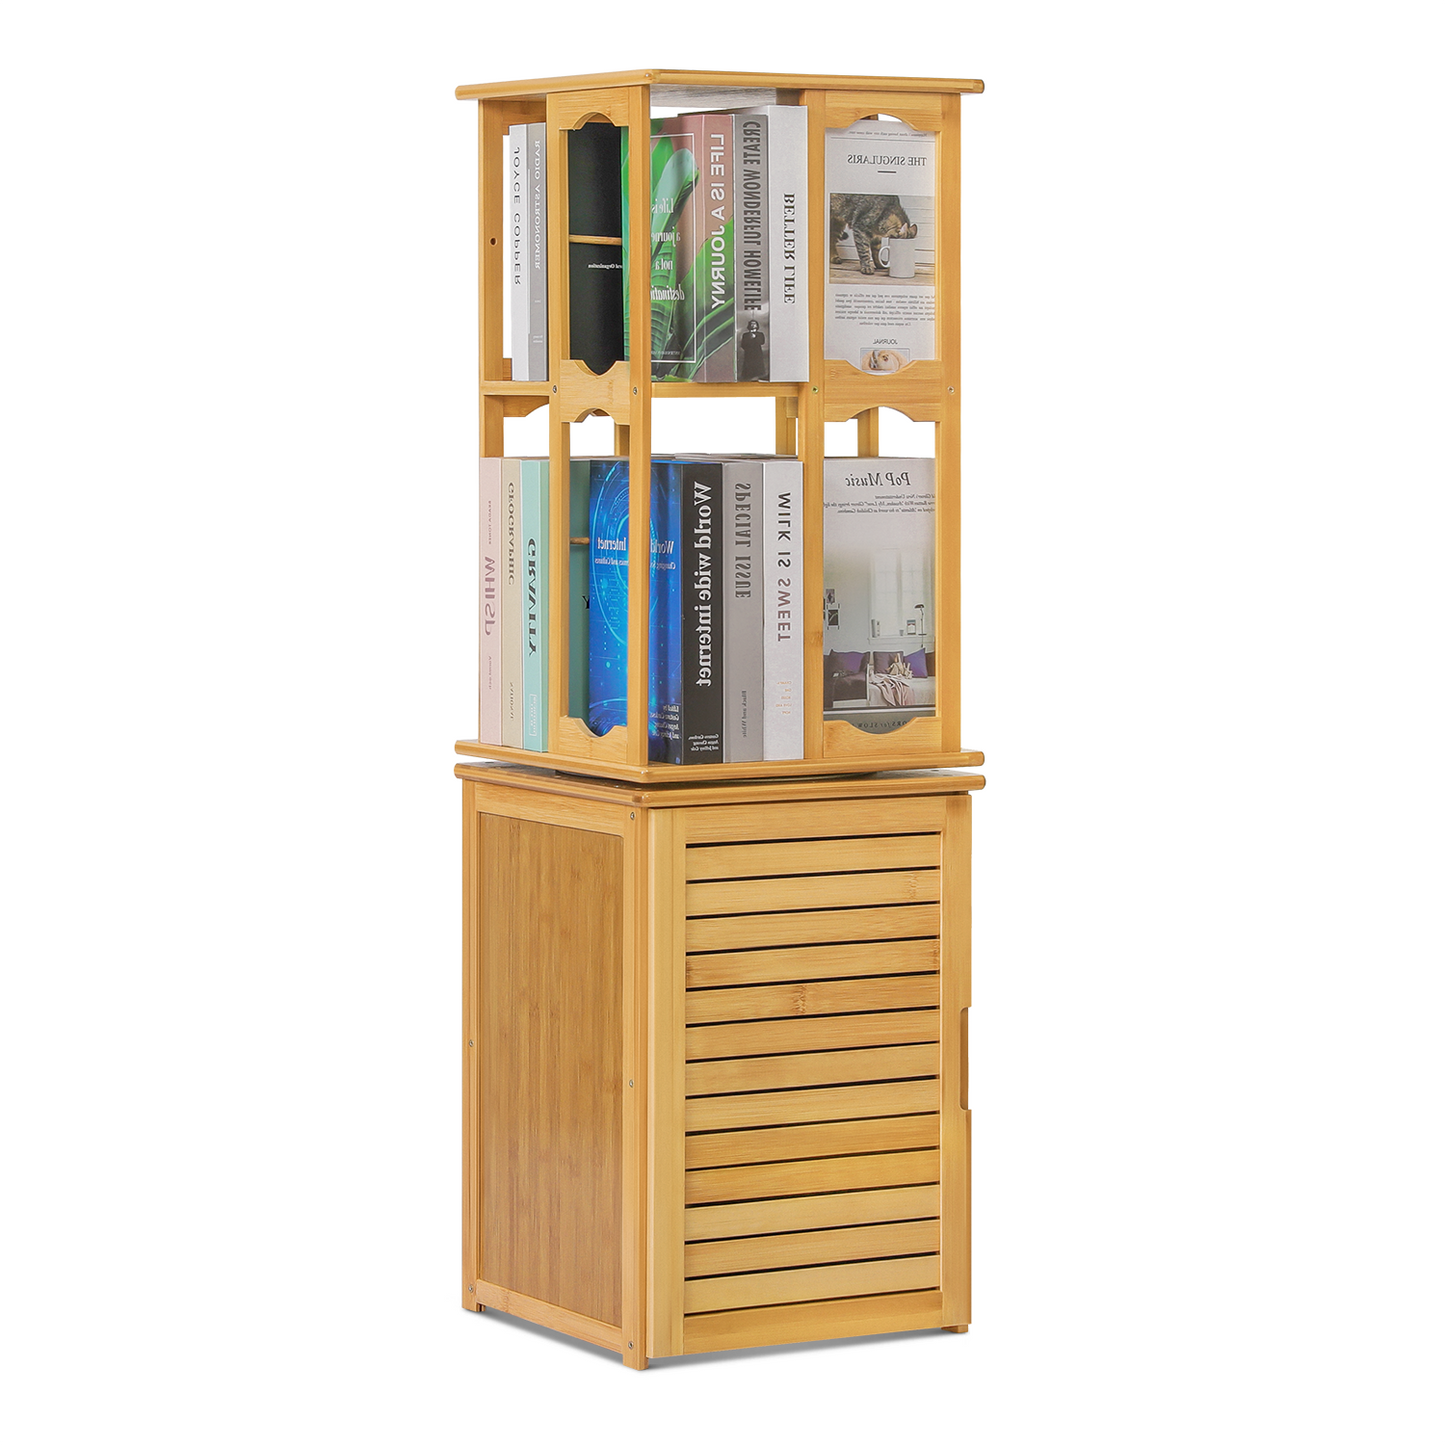 360°Swivel Bookshelf - Oval Hollow Pattern - with Bottom Cabinet Storage - 15" - Natural